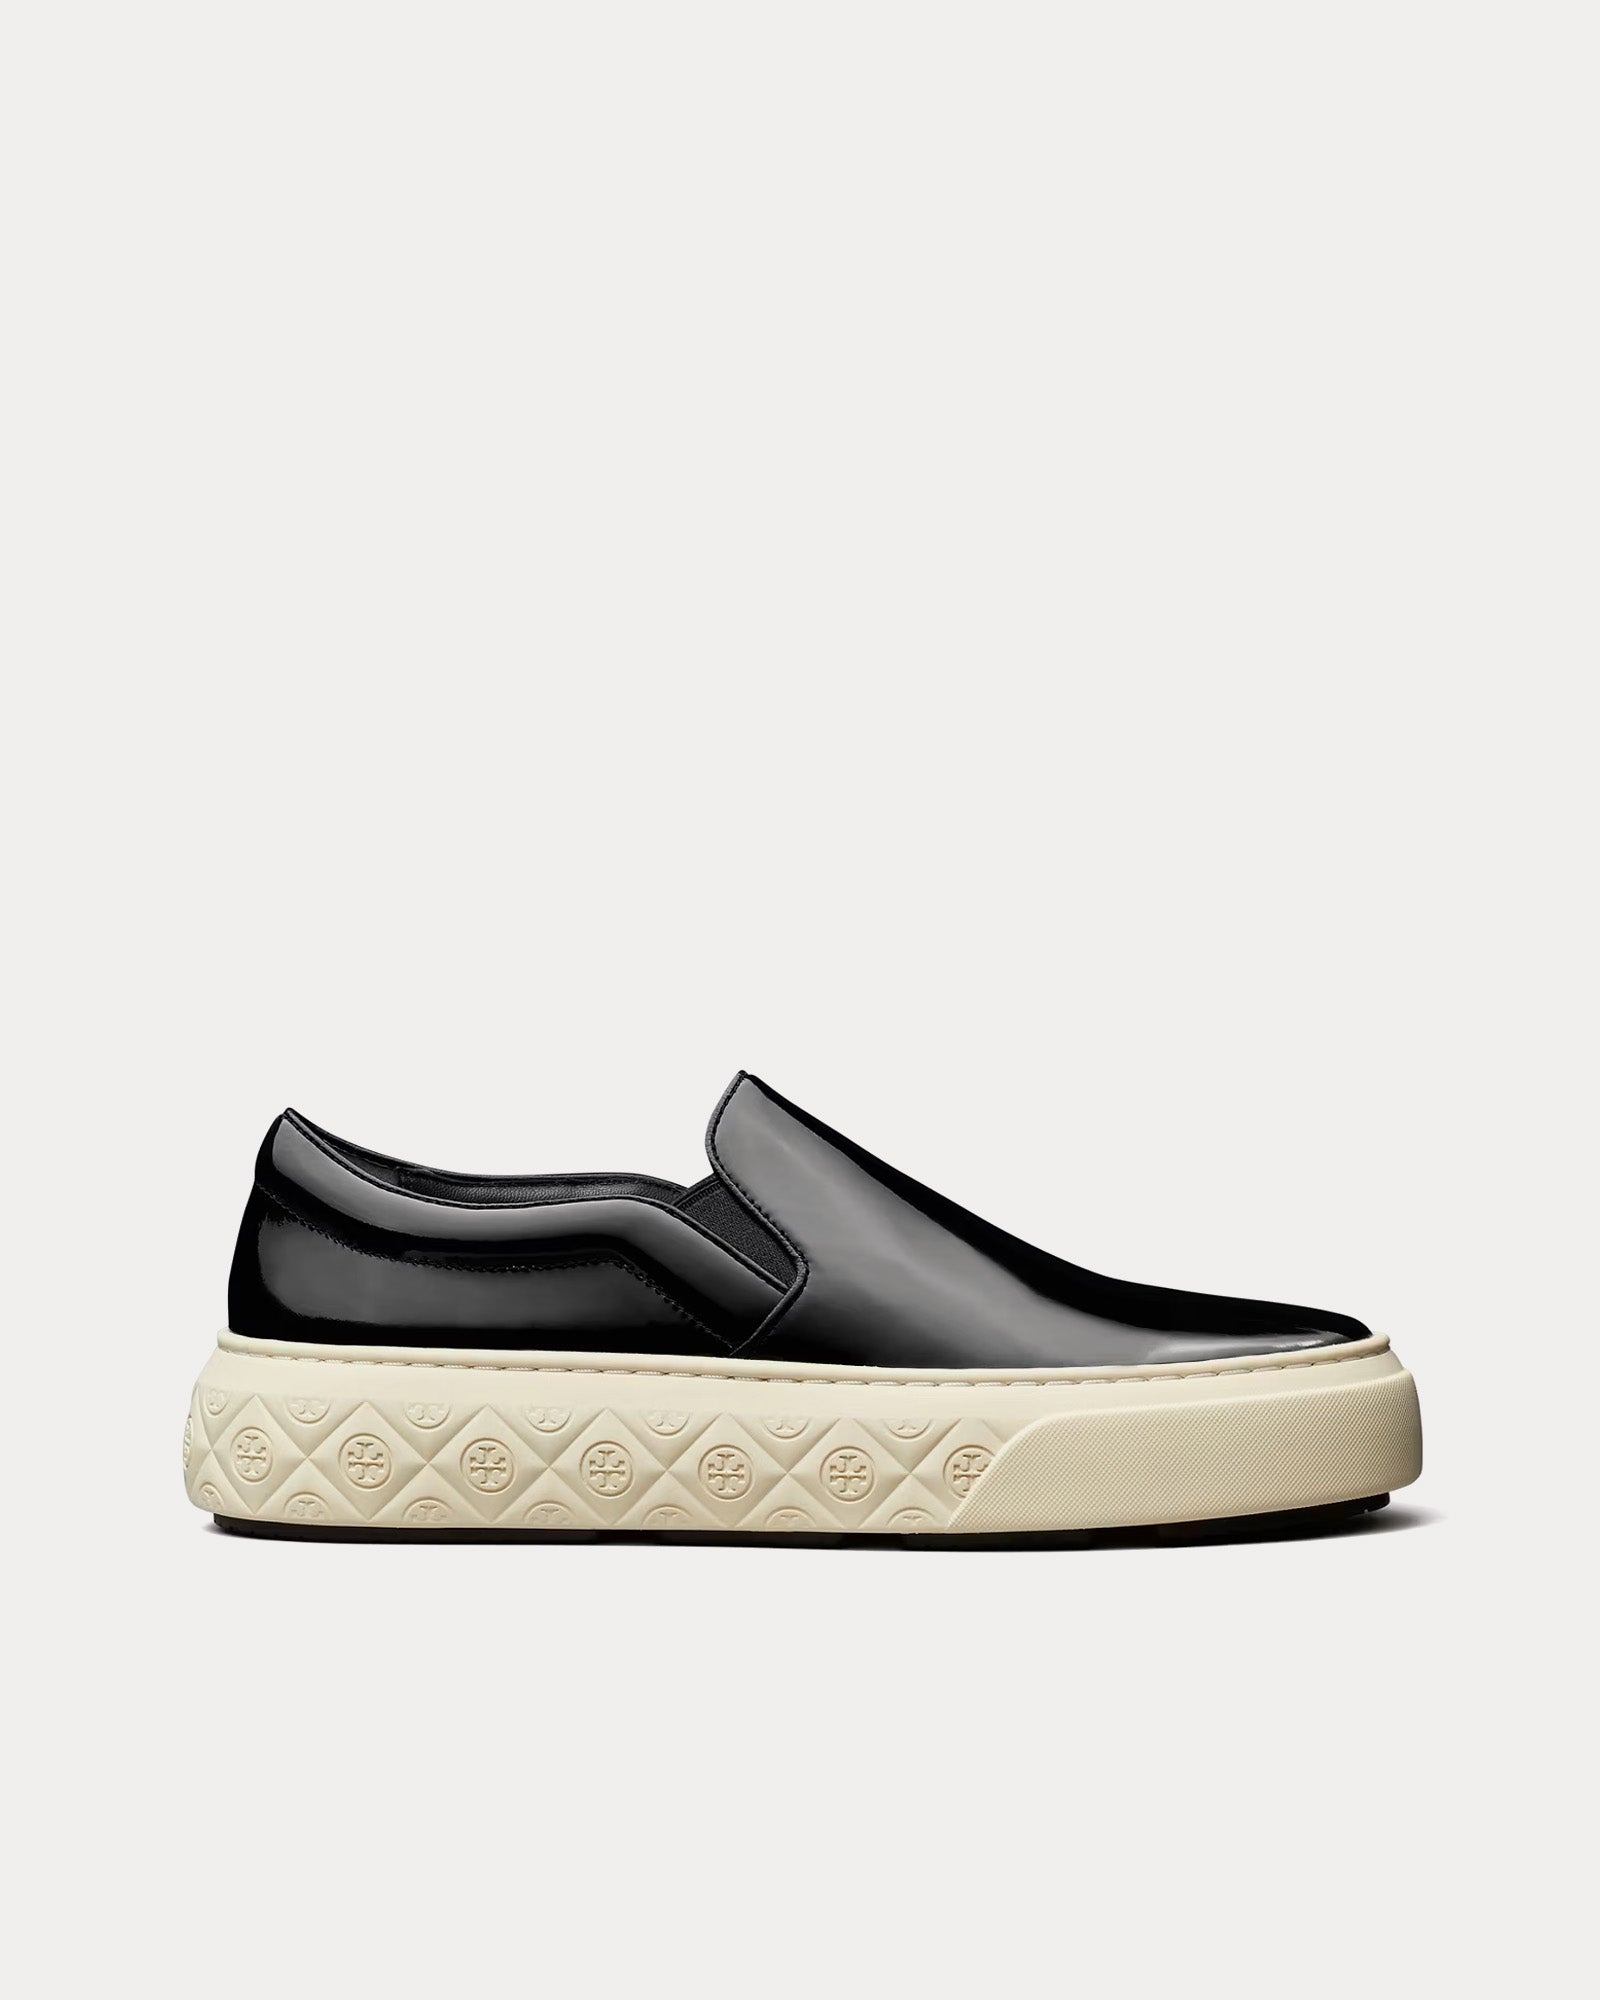 Tory Burch - Ladybug Patent Leather Black Slip On Sneakers